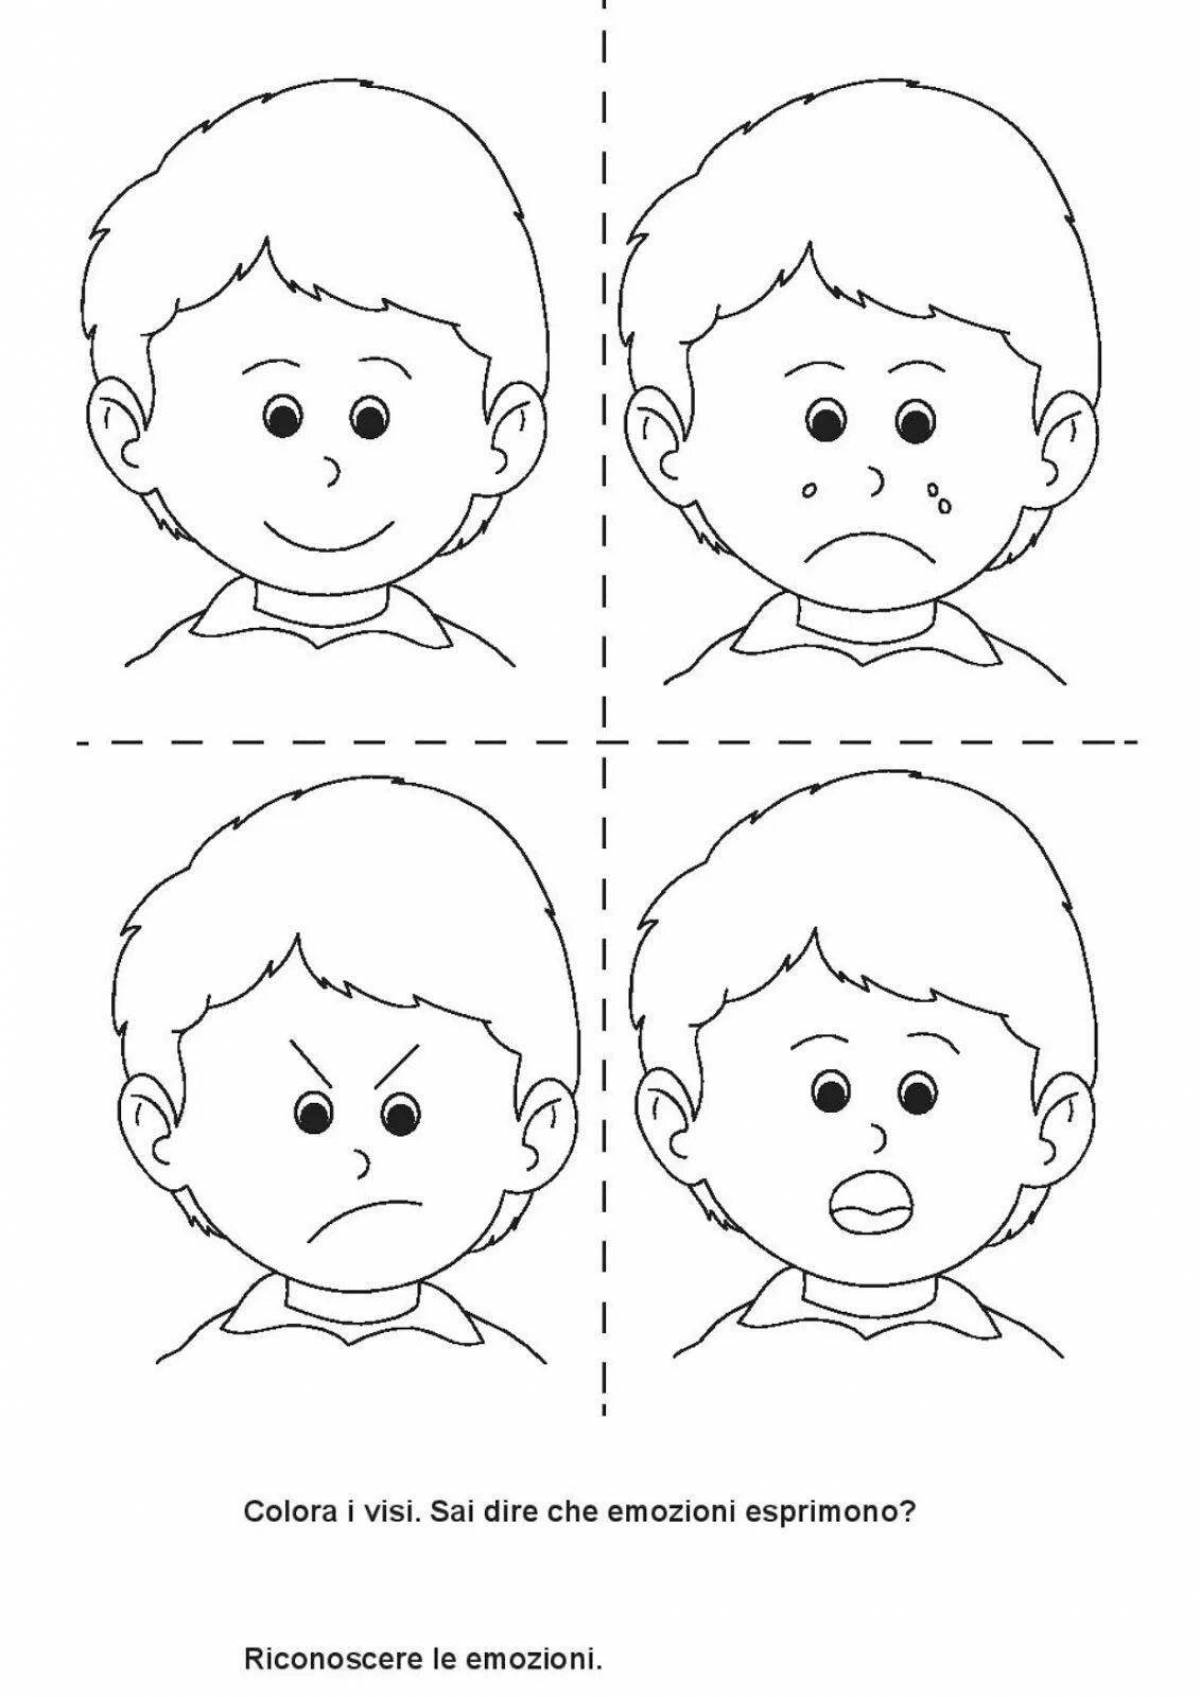 Fun emotion coloring pages for kids